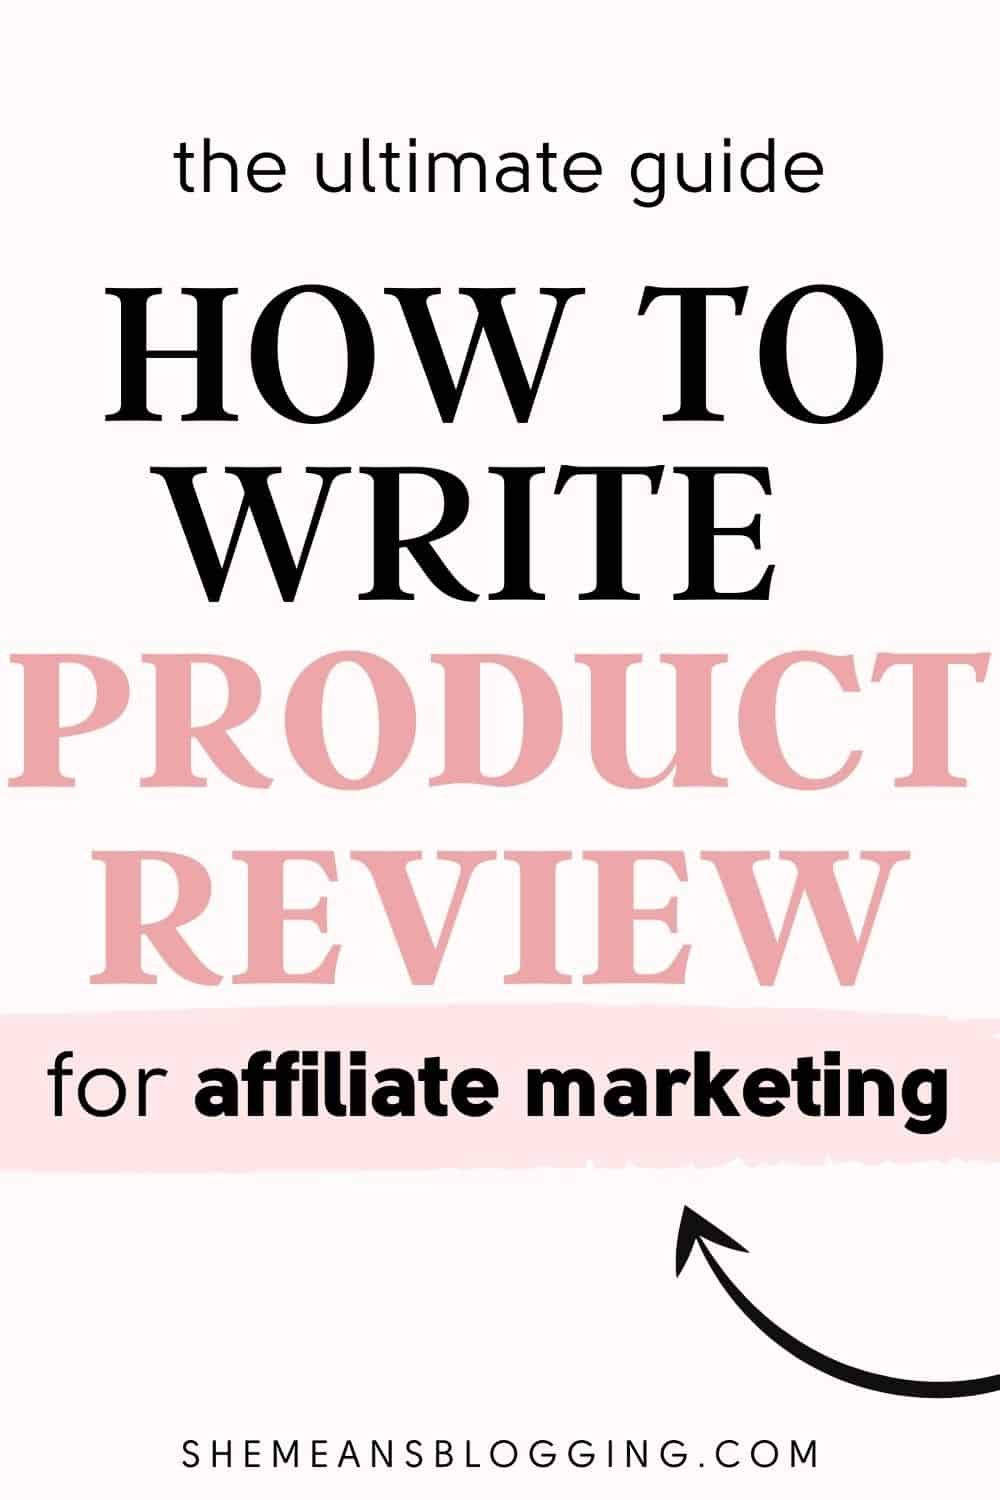 What makes a good affiliate product review? Learn everything on how to write a product review for affiliate marketing. Use this guide to write product reviews 